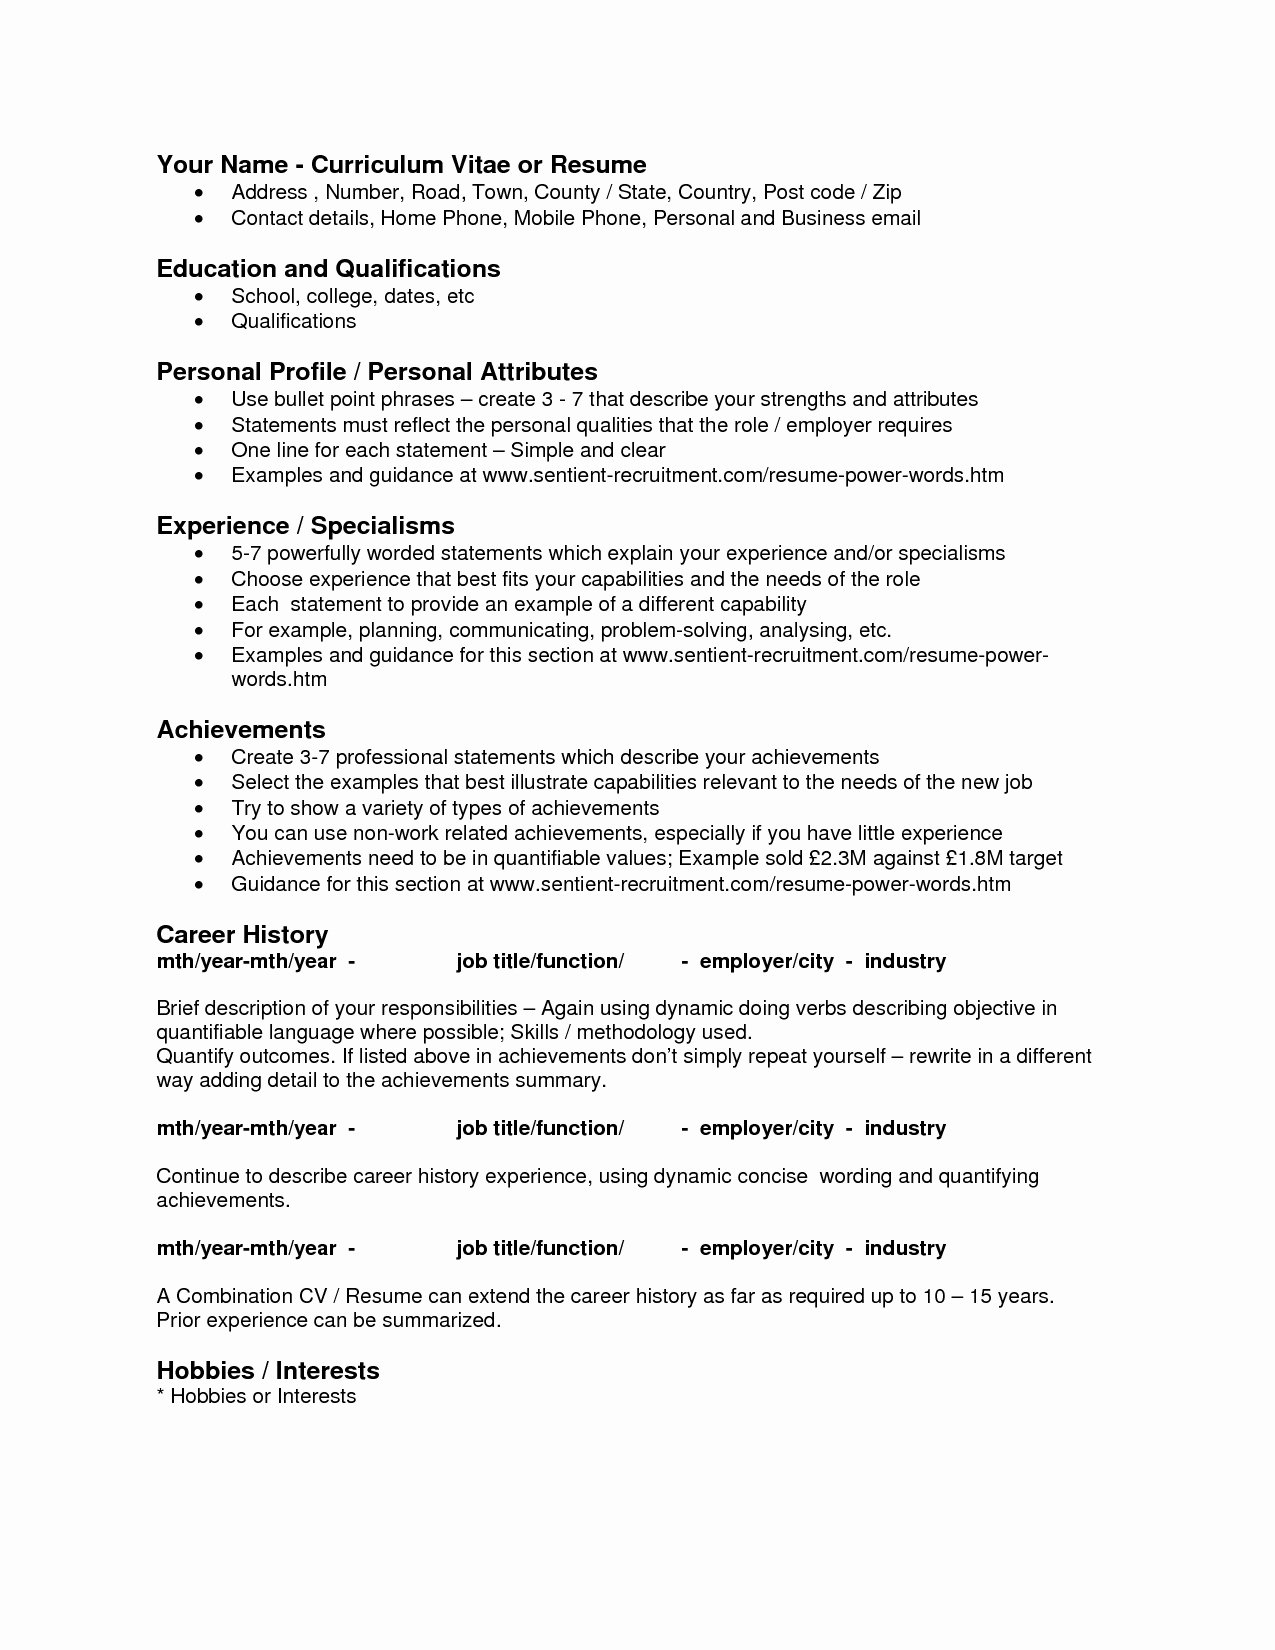 Personal attributes In Resume Resume Ideas